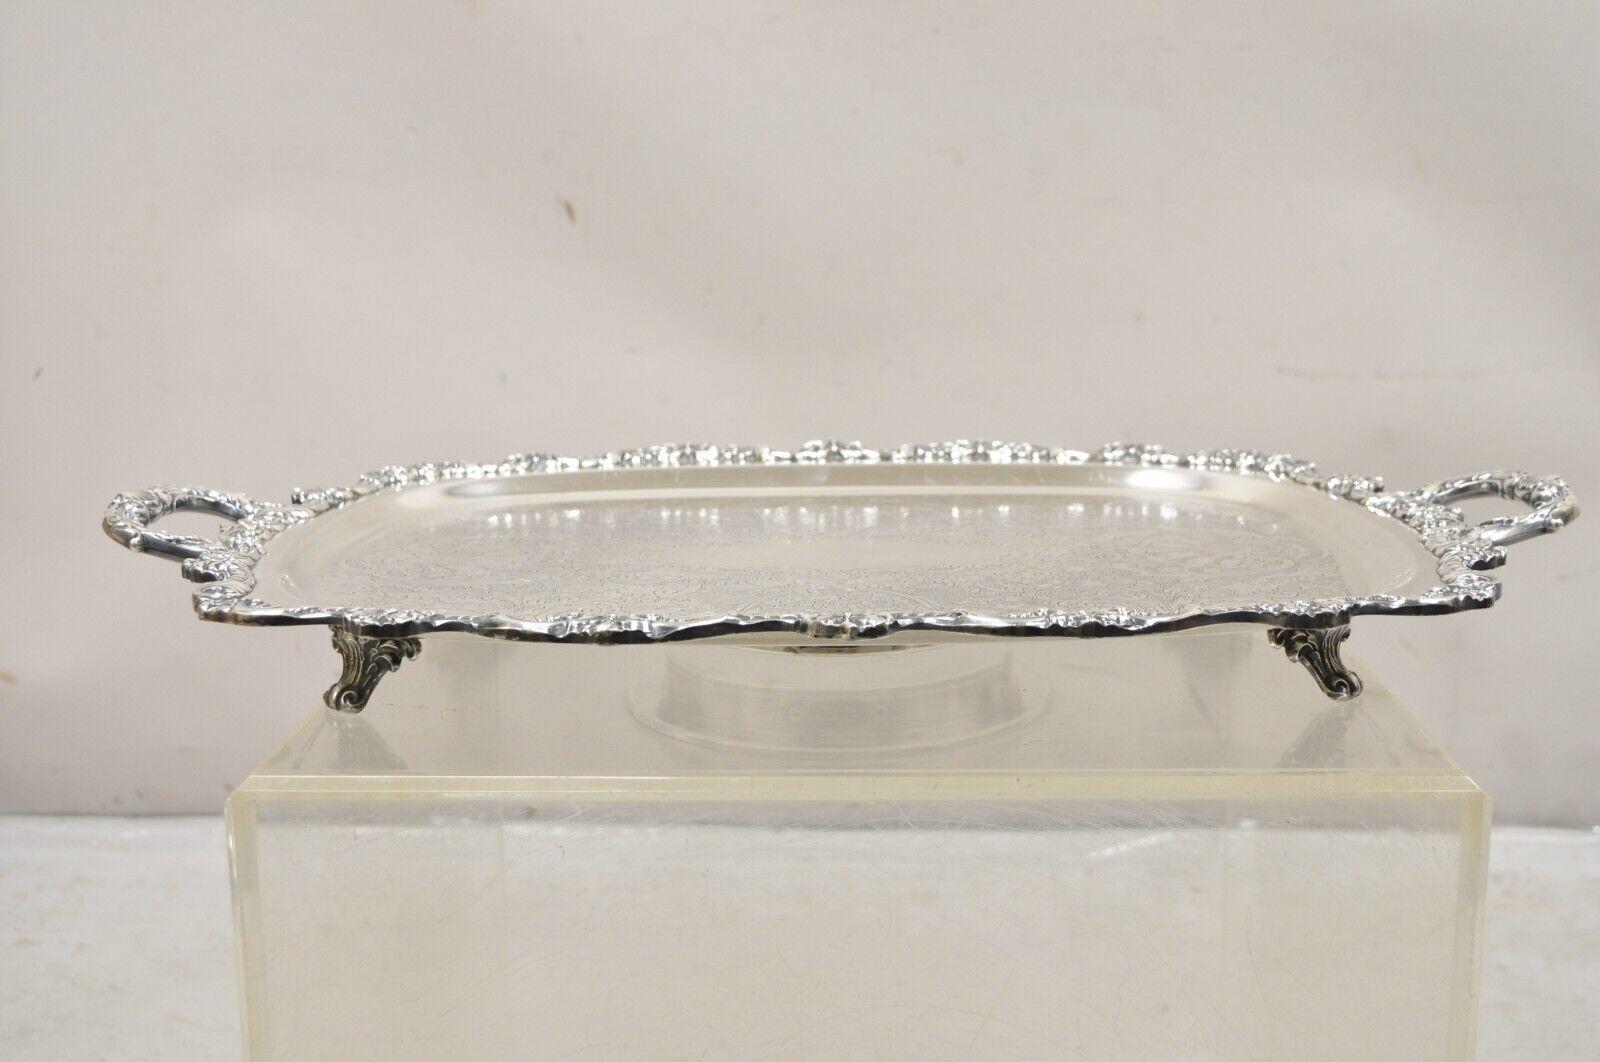 Vintage Poole Silver Co. 5050 EPCA Silver Plated Serving Platter Tray. (Does not include power cord for electrified warmer). Circa Mid to Late 20th Century. Measurements: 2